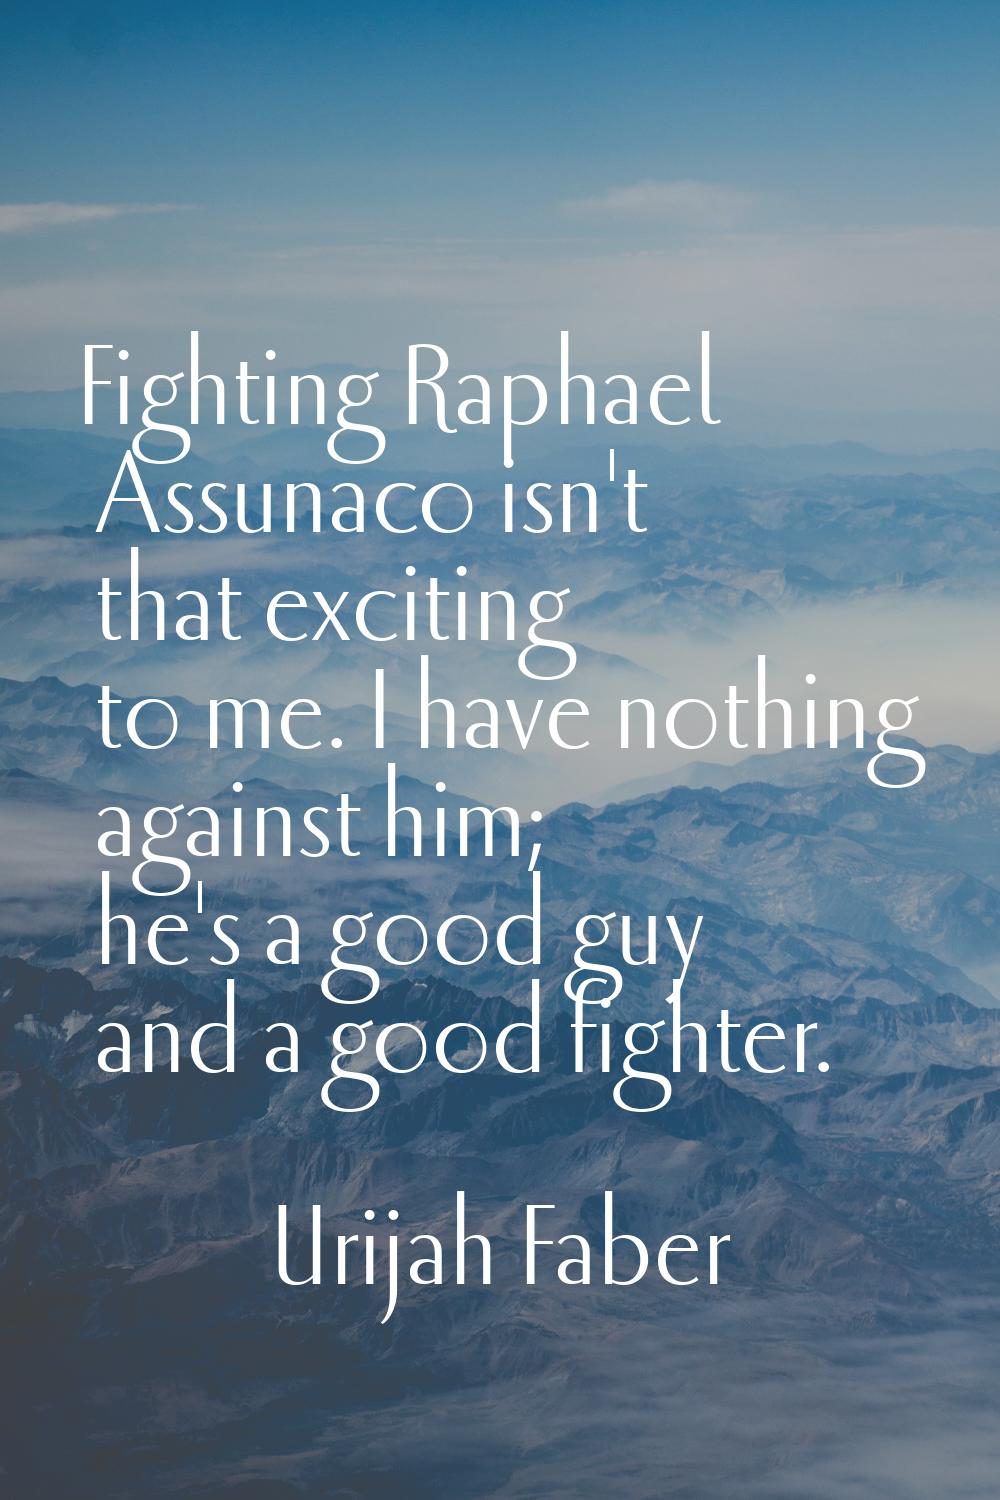 Fighting Raphael Assunaco isn't that exciting to me. I have nothing against him; he's a good guy an